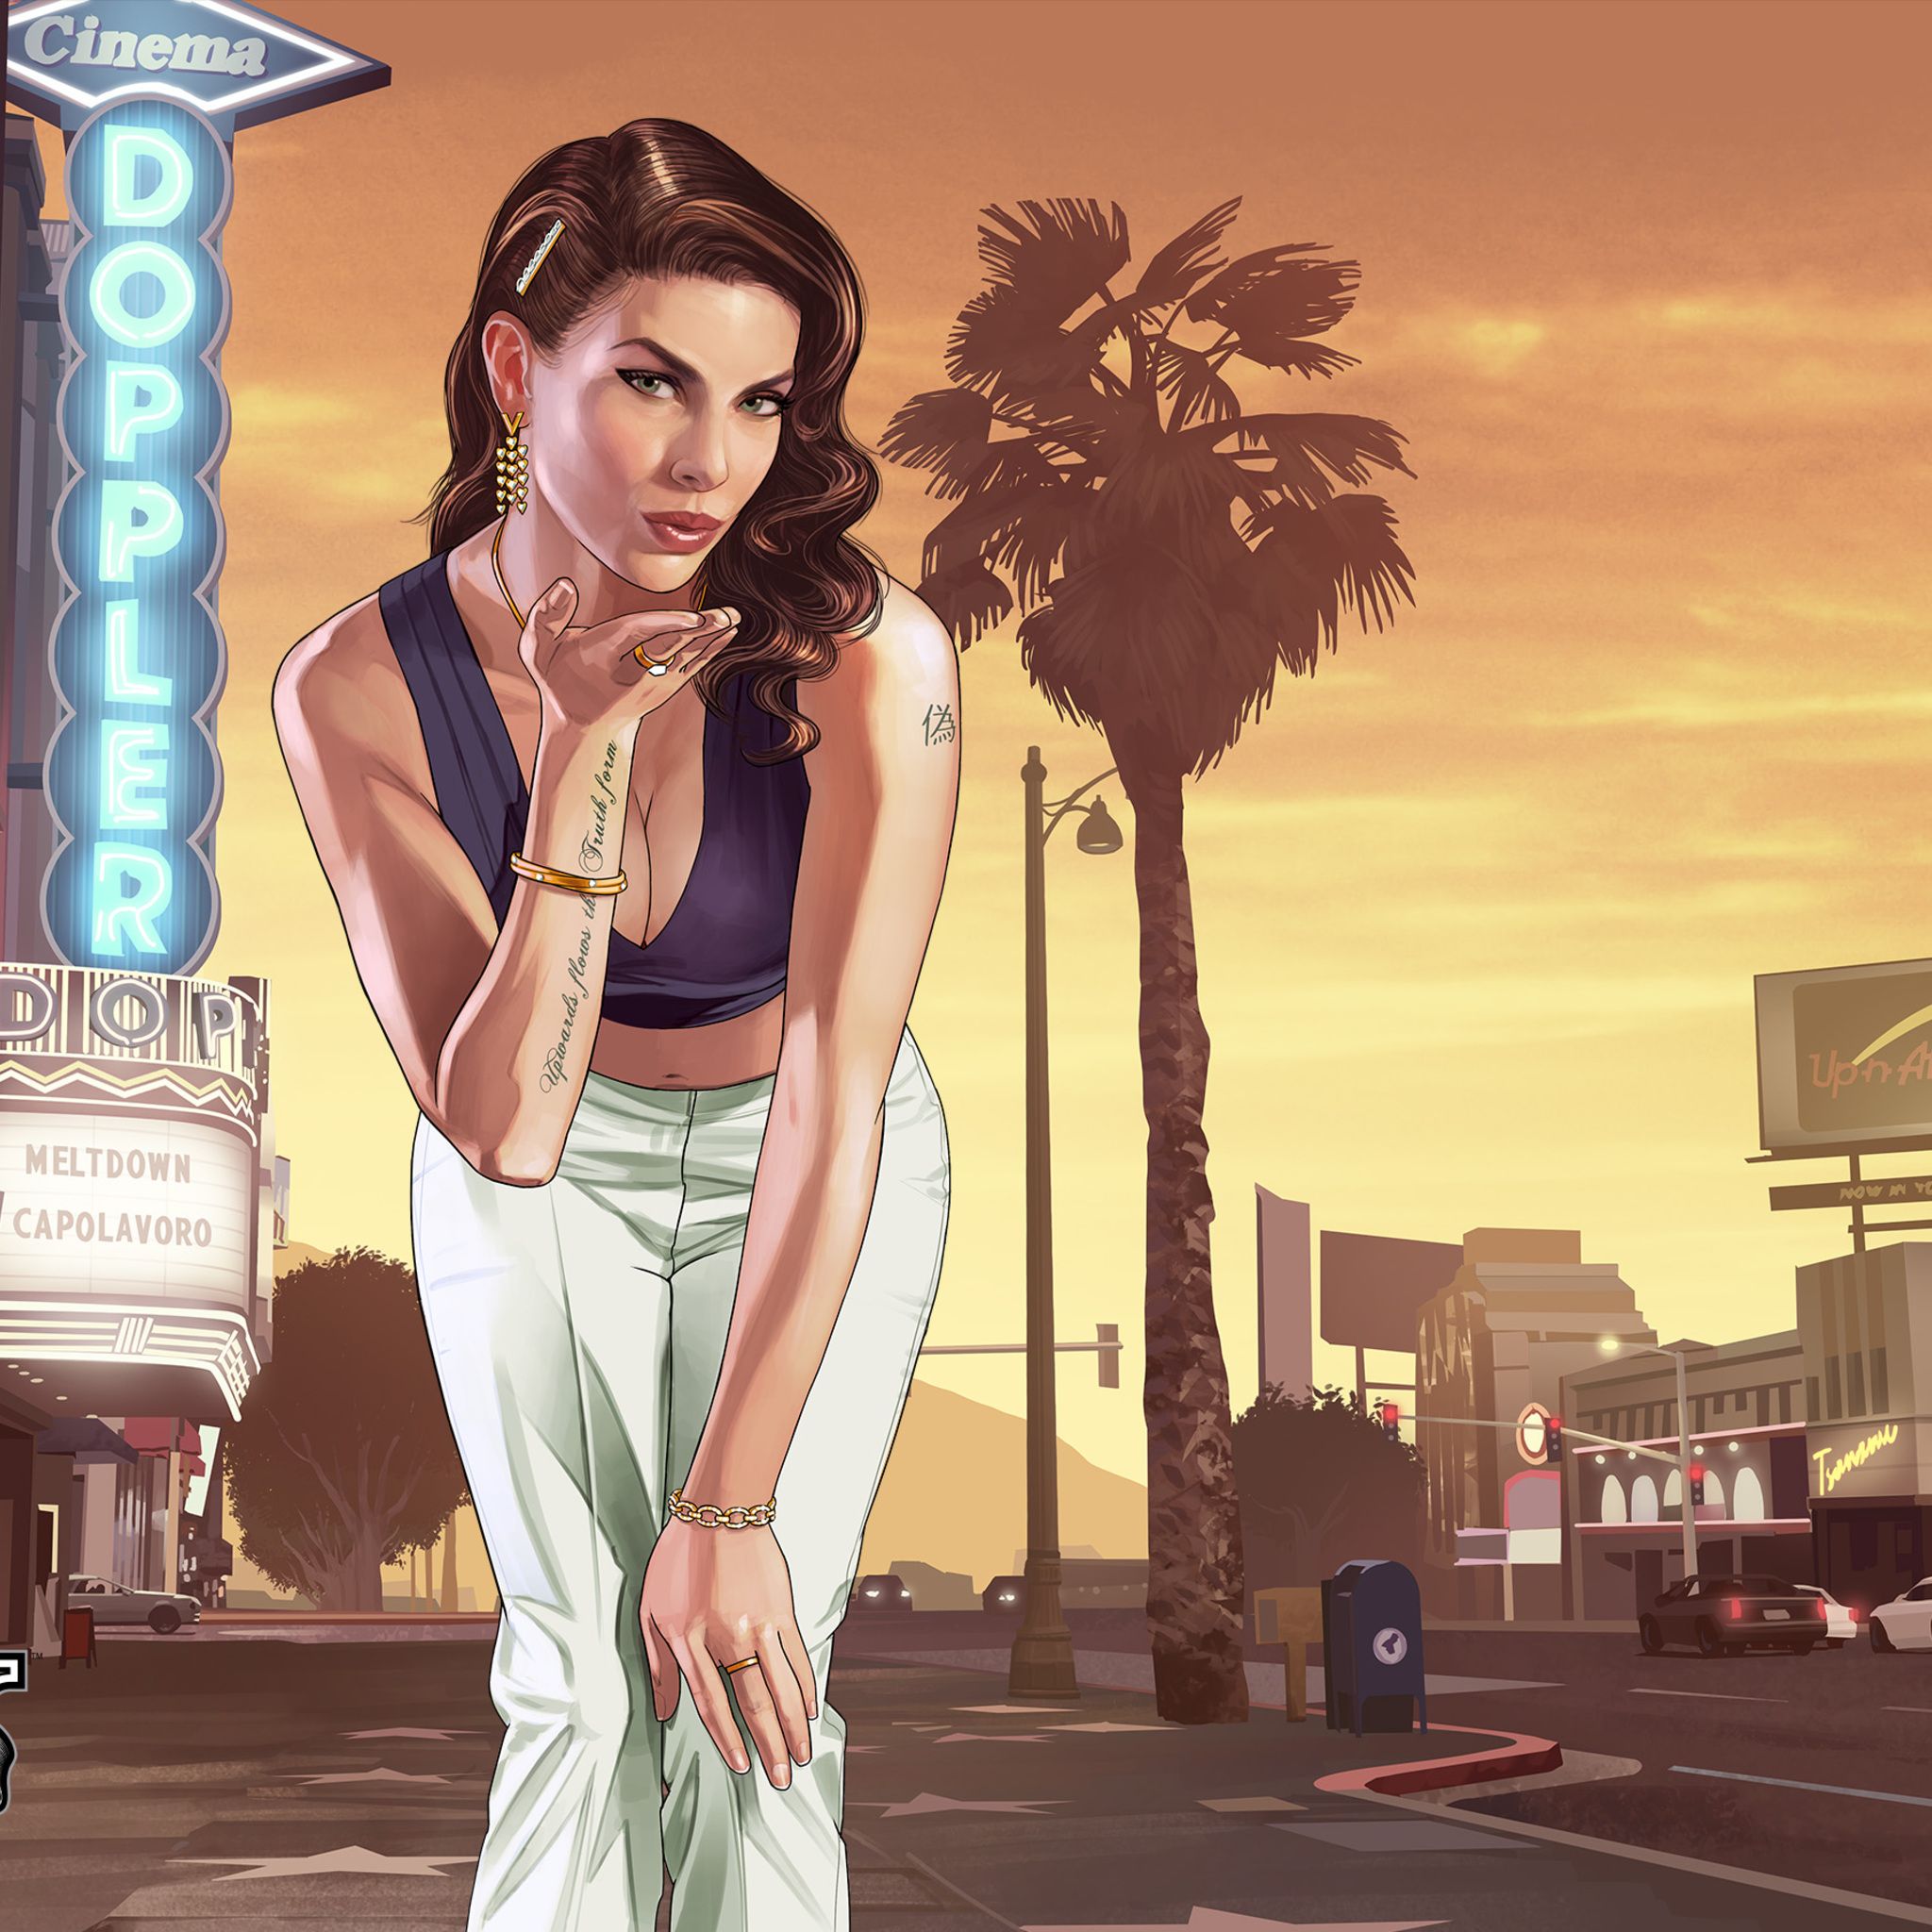 Gta 5 Loading Girl iPad Air HD 4k Wallpaper, Image, Background, Photo and Picture